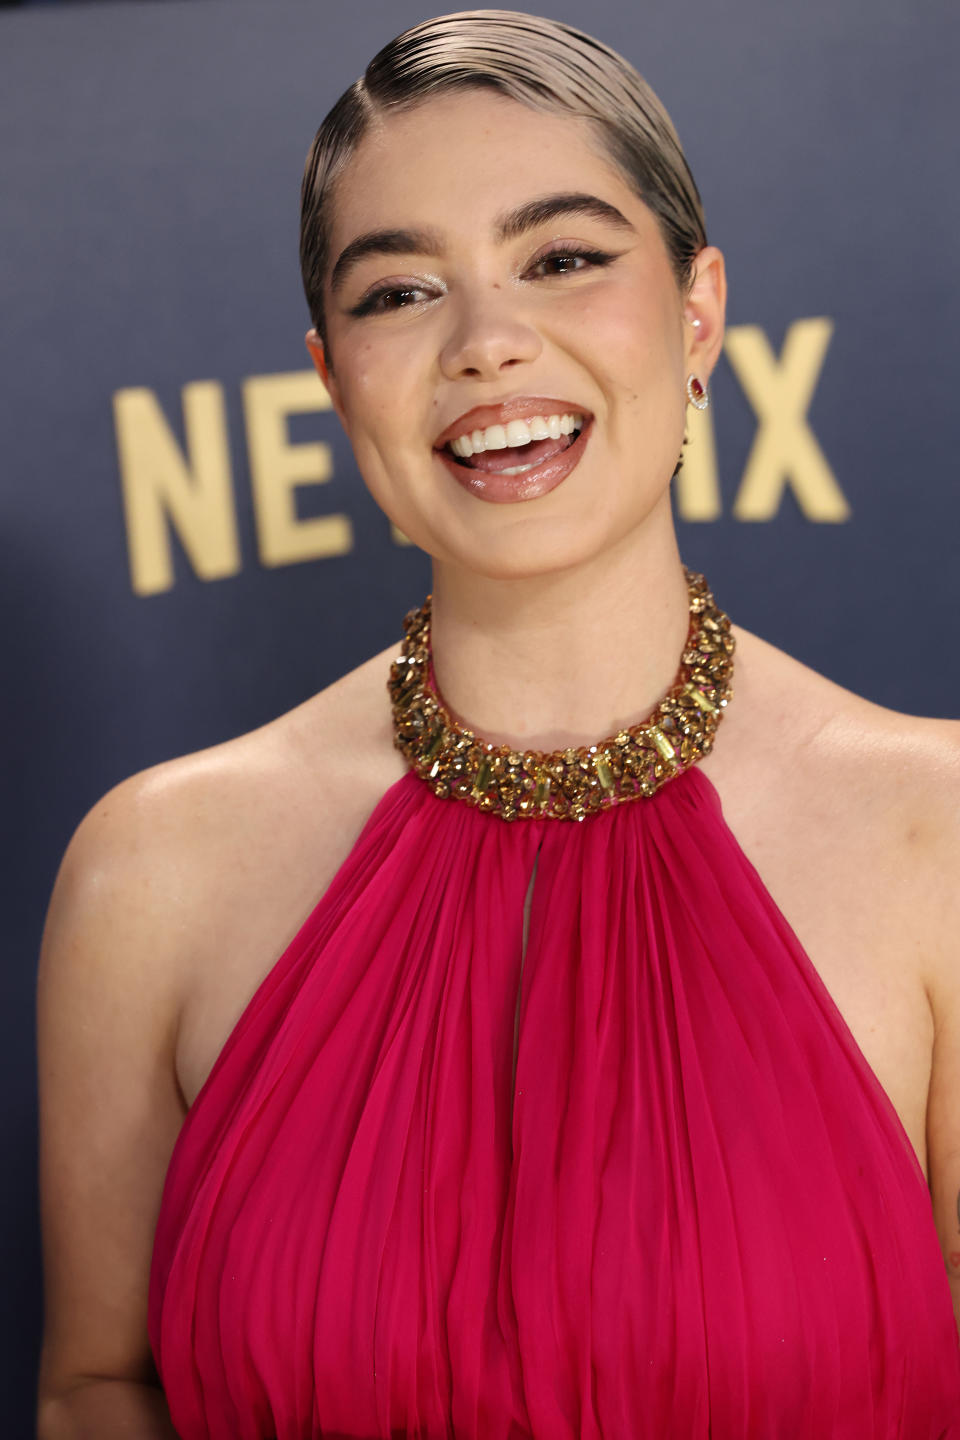 Auli'i Cravalho in pleated gown with gold neckpiece smiling against event backdrop